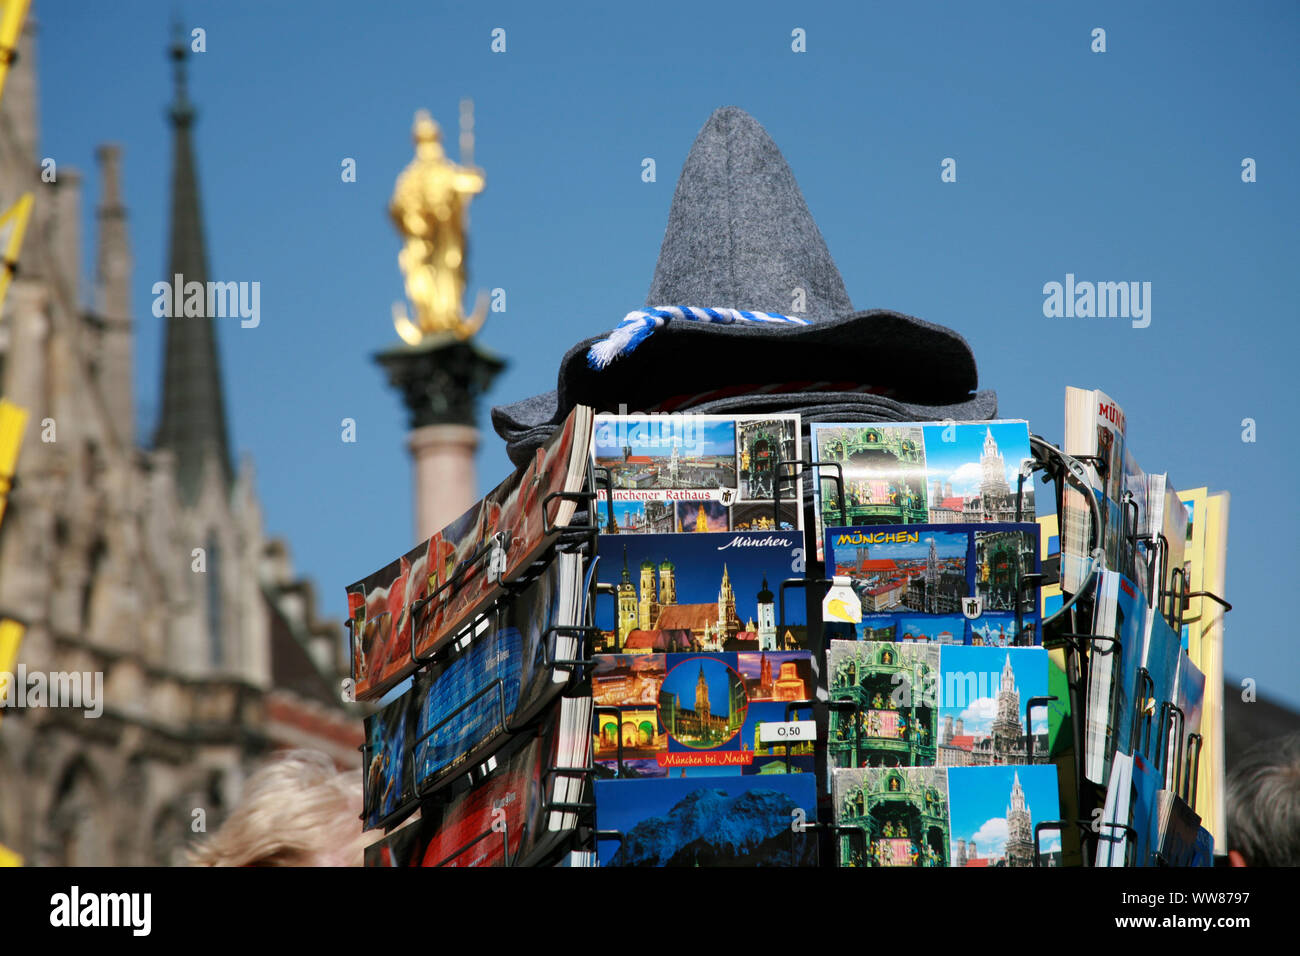 Postcard rack with Bavarian felt hat in front of Munich Marian column Stock Photo